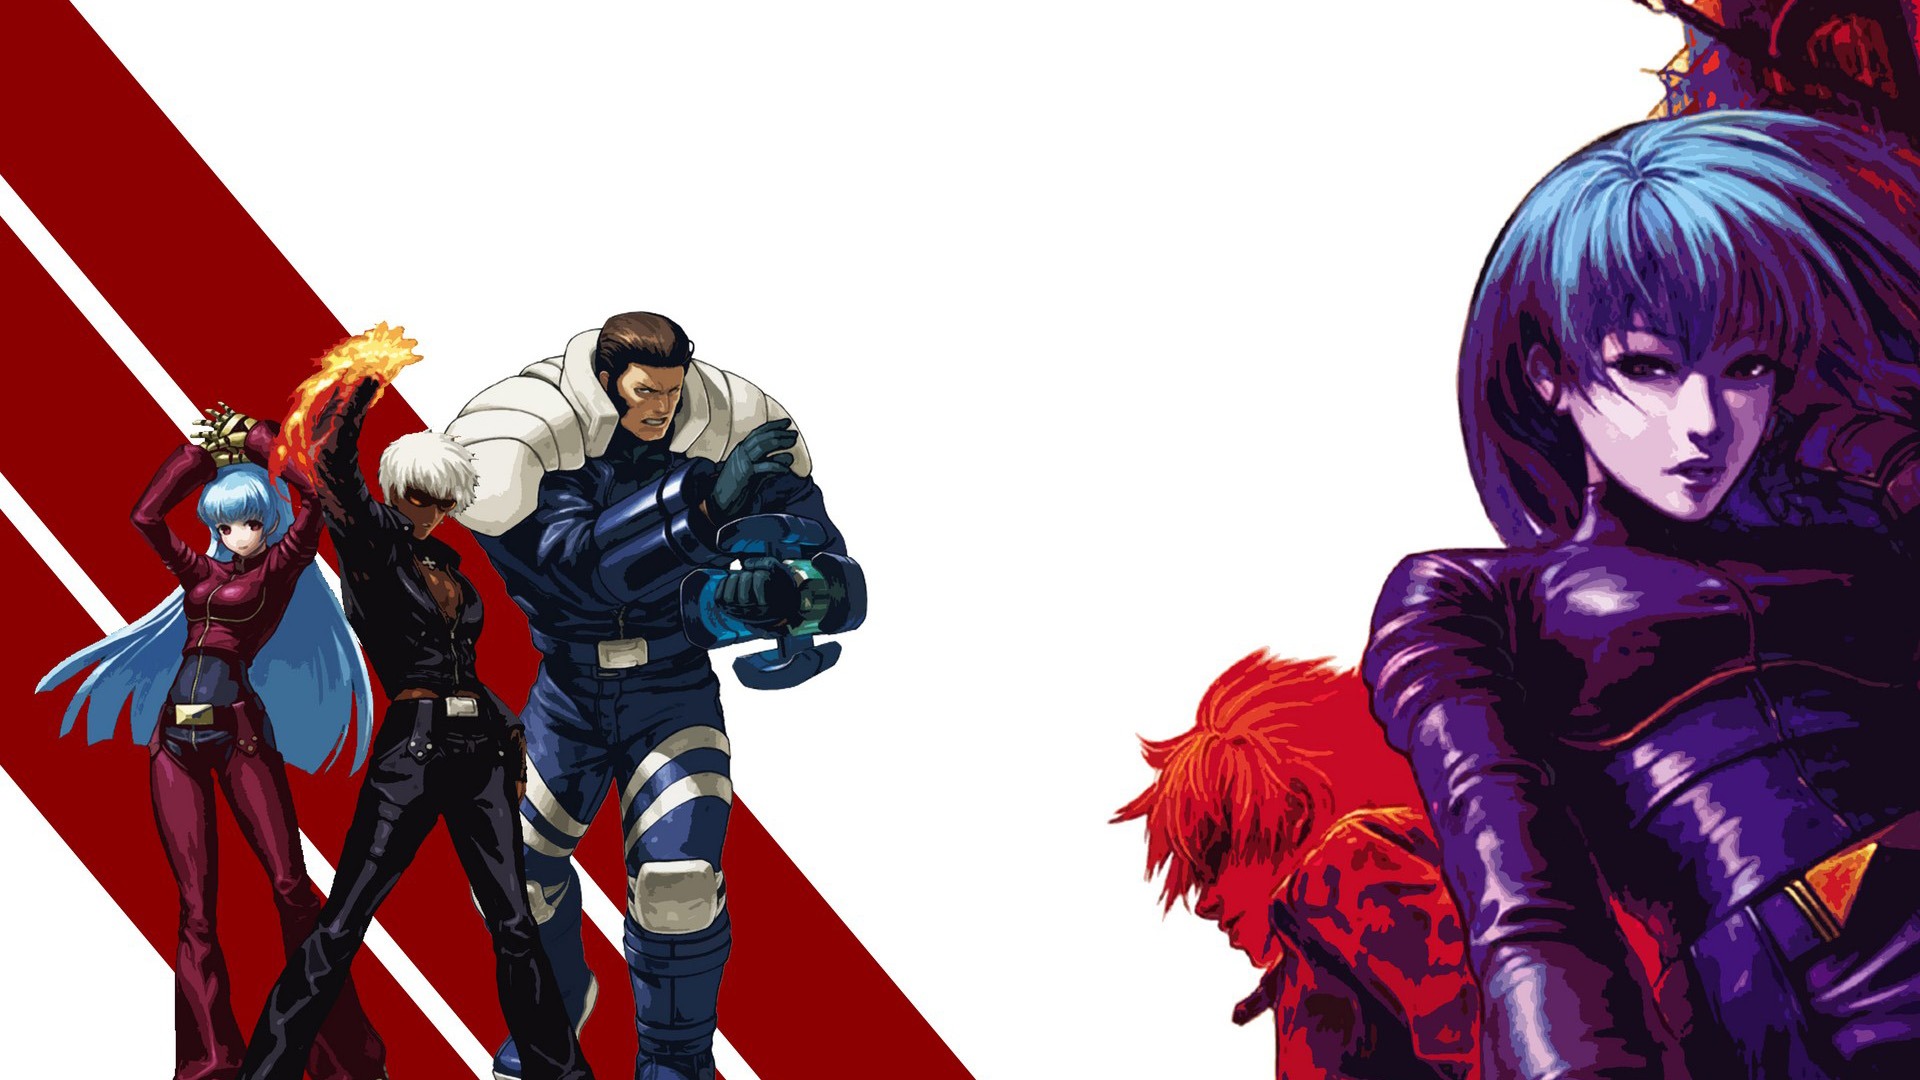 The King of Fighters XIII wallpapers #5 - 1920x1080